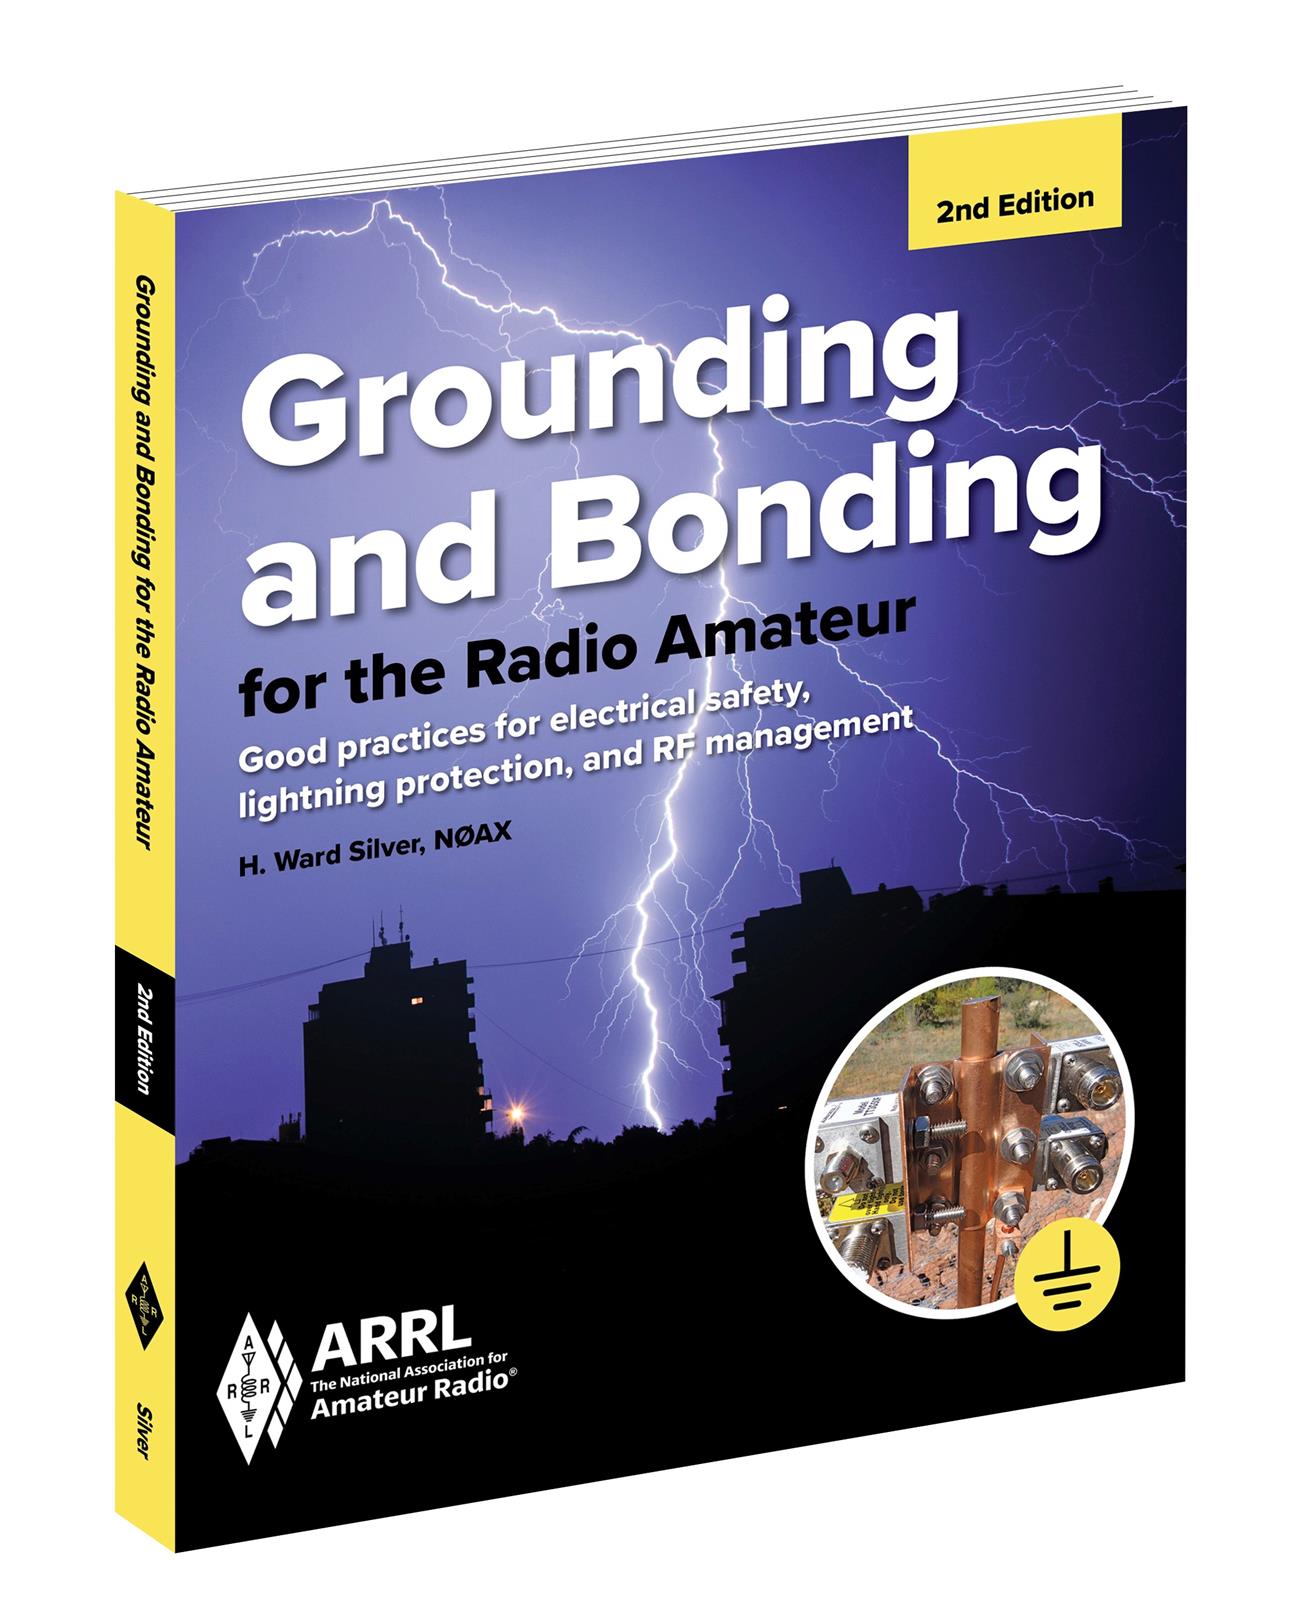 Image and link of 'Grounding and Bonding for the Radio Amateur'